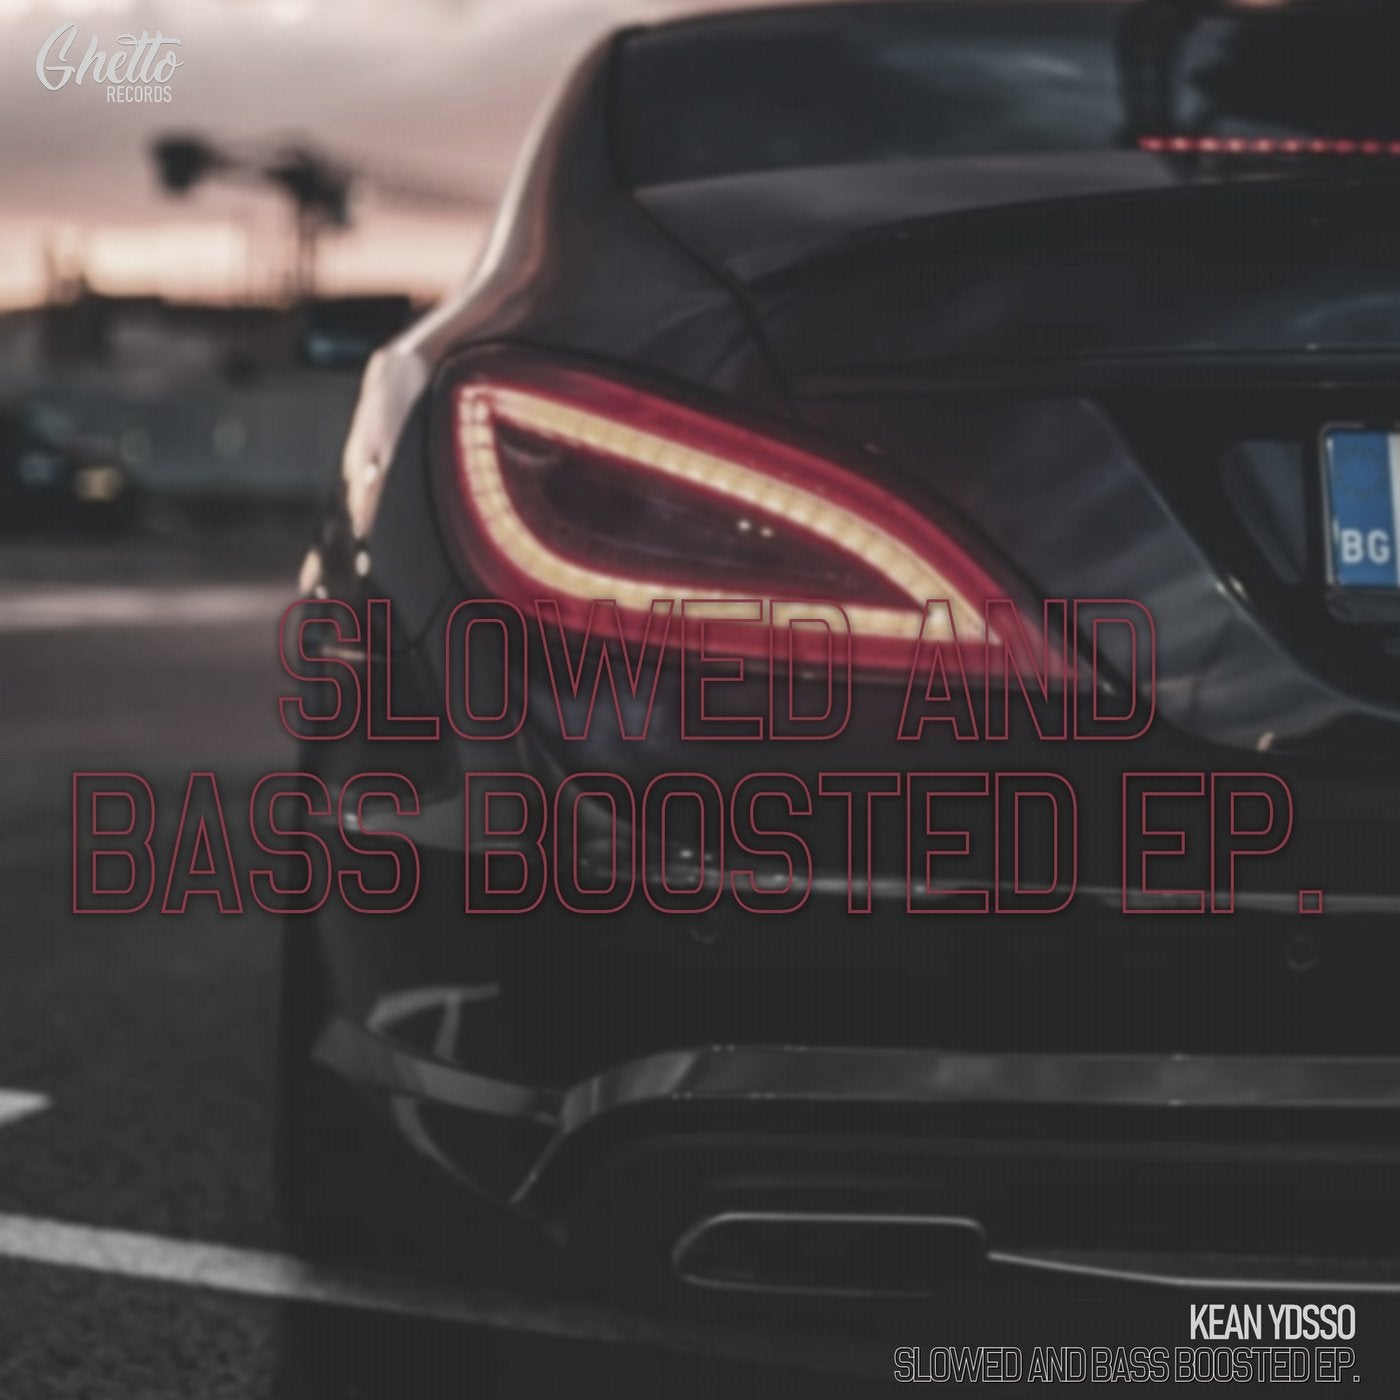 SLOWED AND BASS BOOSTED